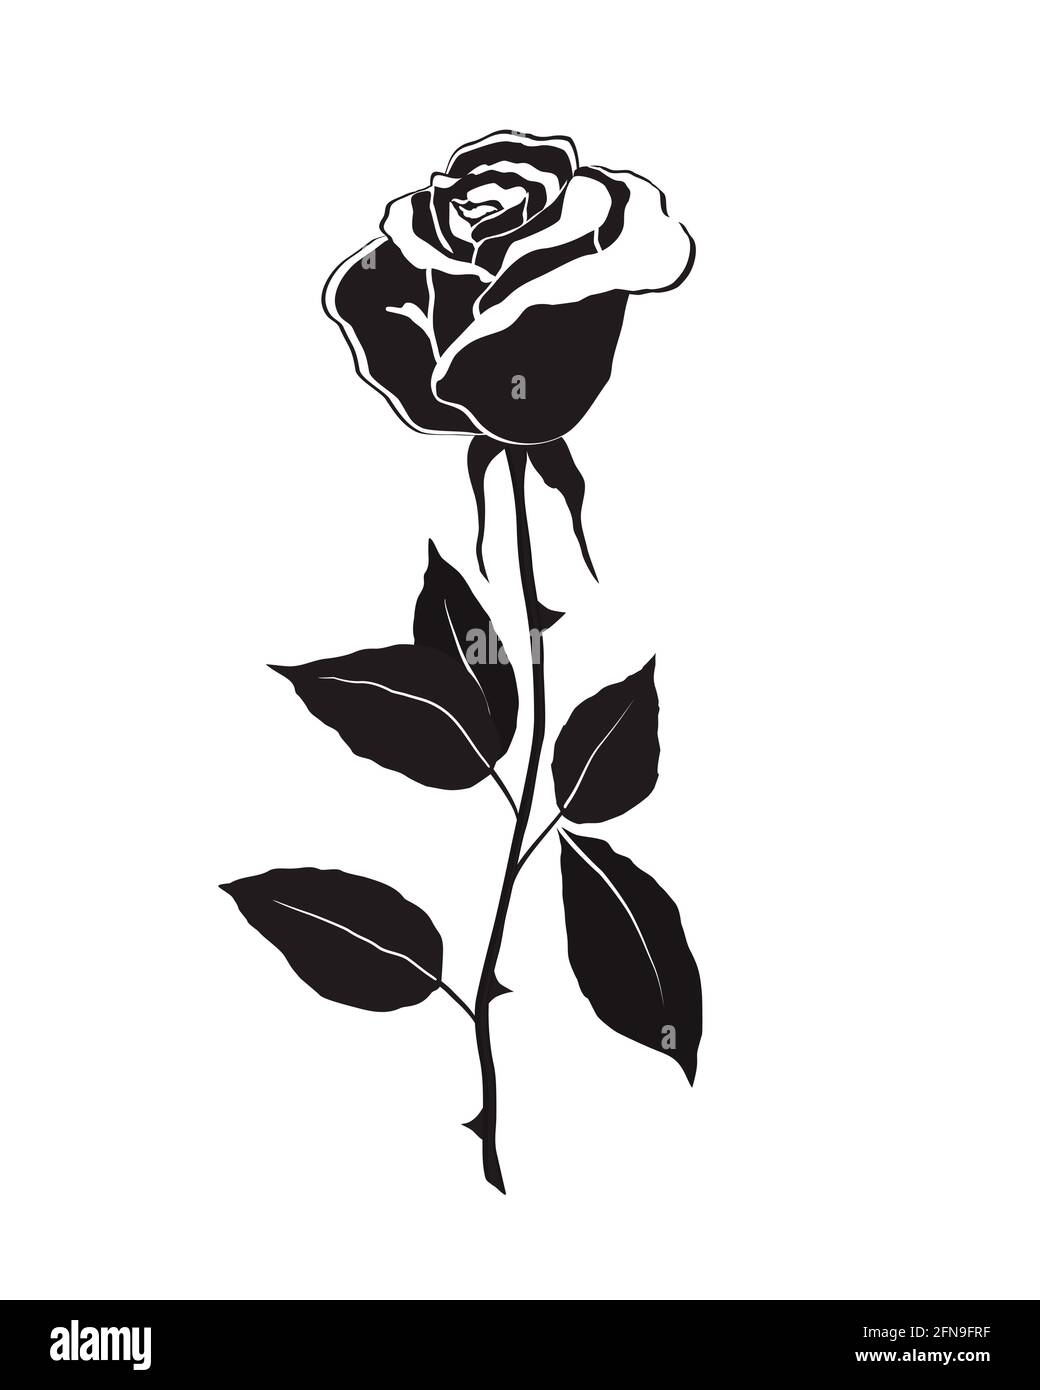 Rose flower with leaves over white background. Black silhouette of ...